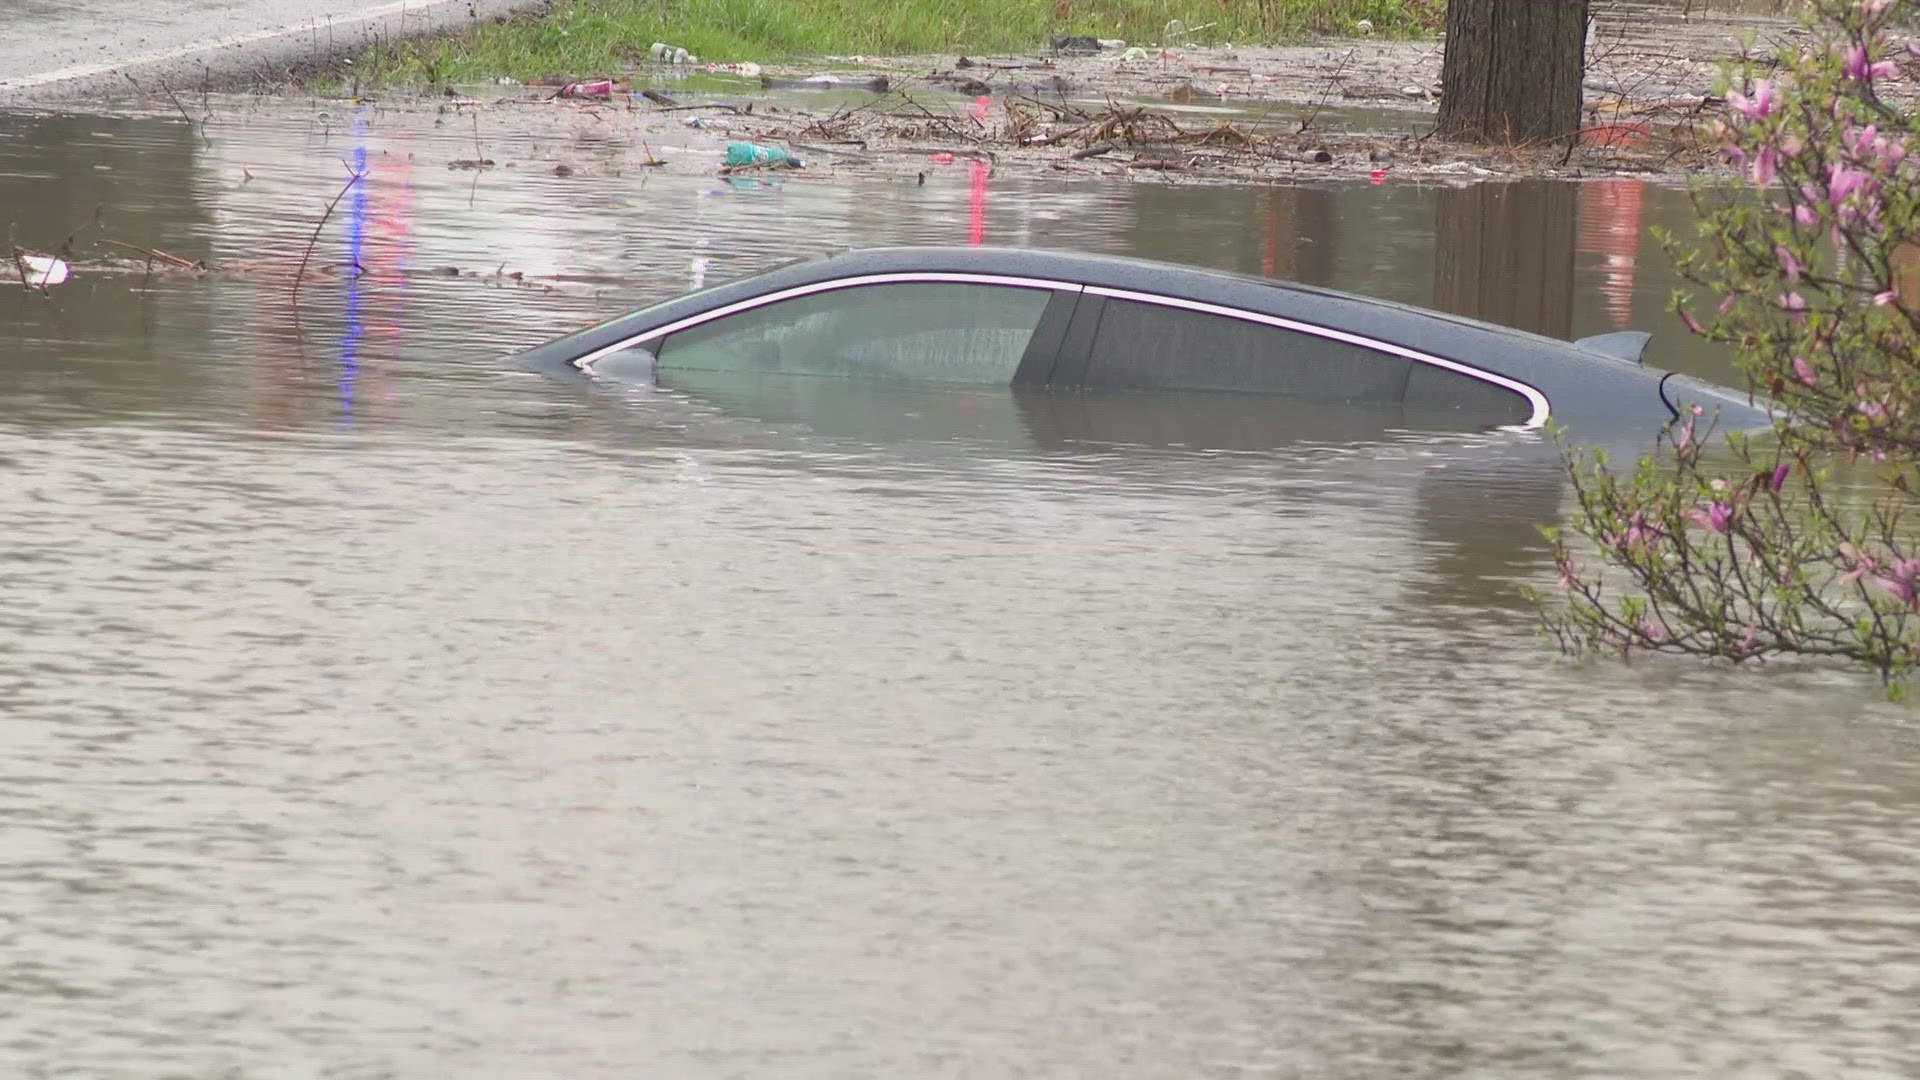 Several vehicles were stranded in floodwater Thursday morning around Indianapolis. At least one driver got to safety on the city's northeast side with some help.